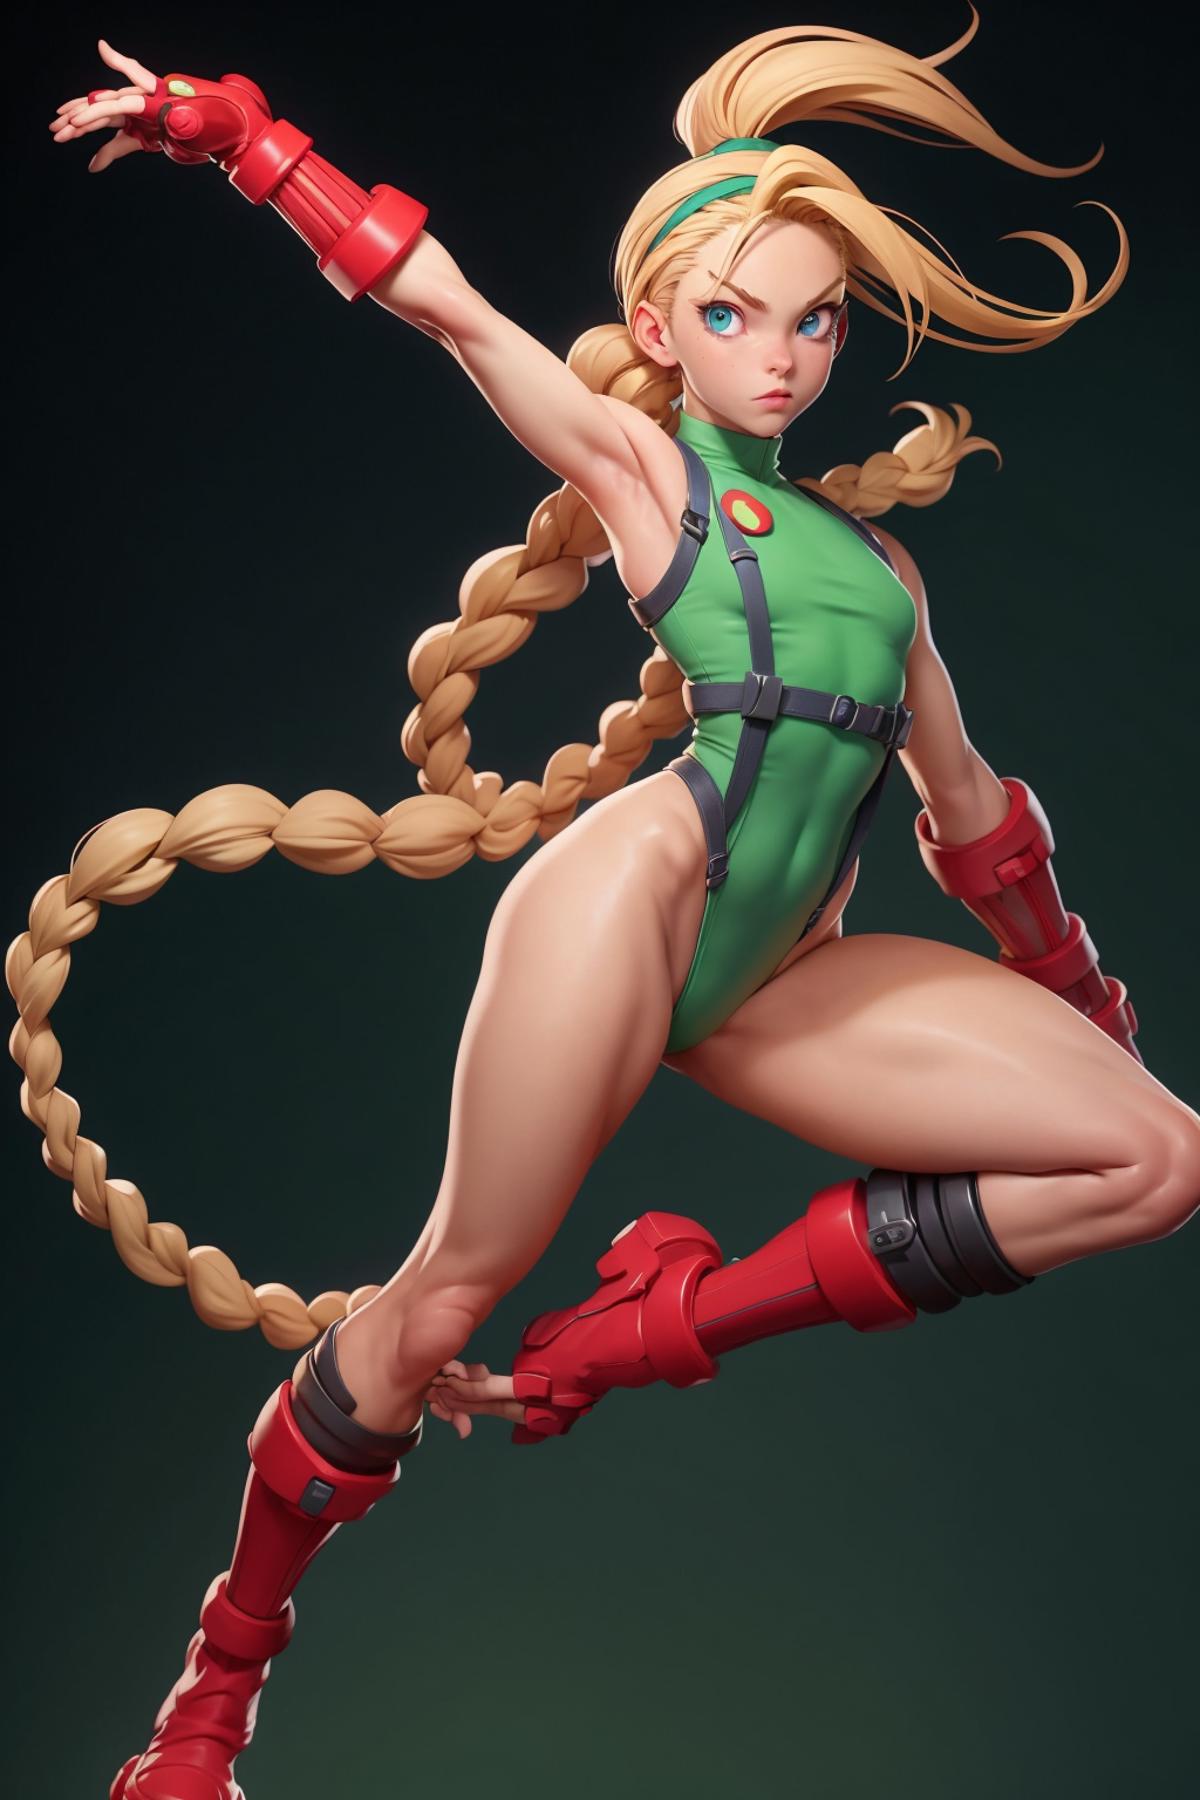 Cammy White / Street Fighter image by disti001